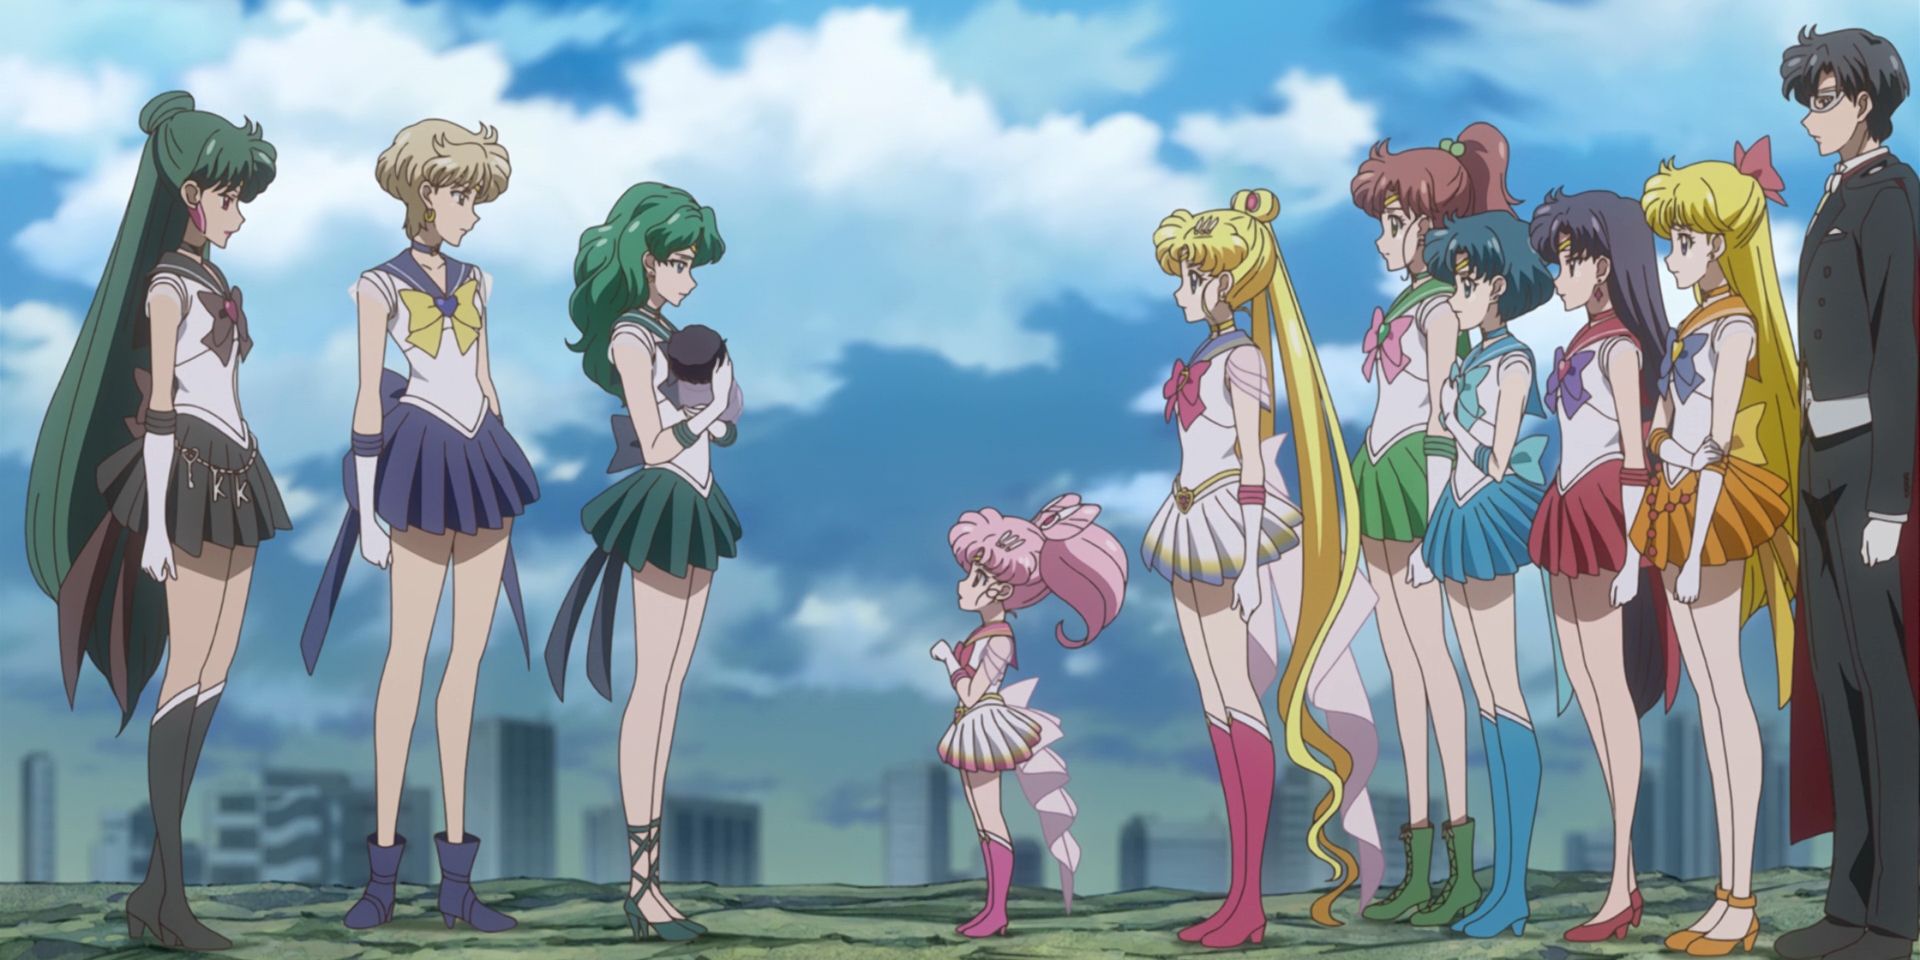 Sailor Moon and the Inners say goodbye to the Outers as they take Hotaru away in Crystal act 38